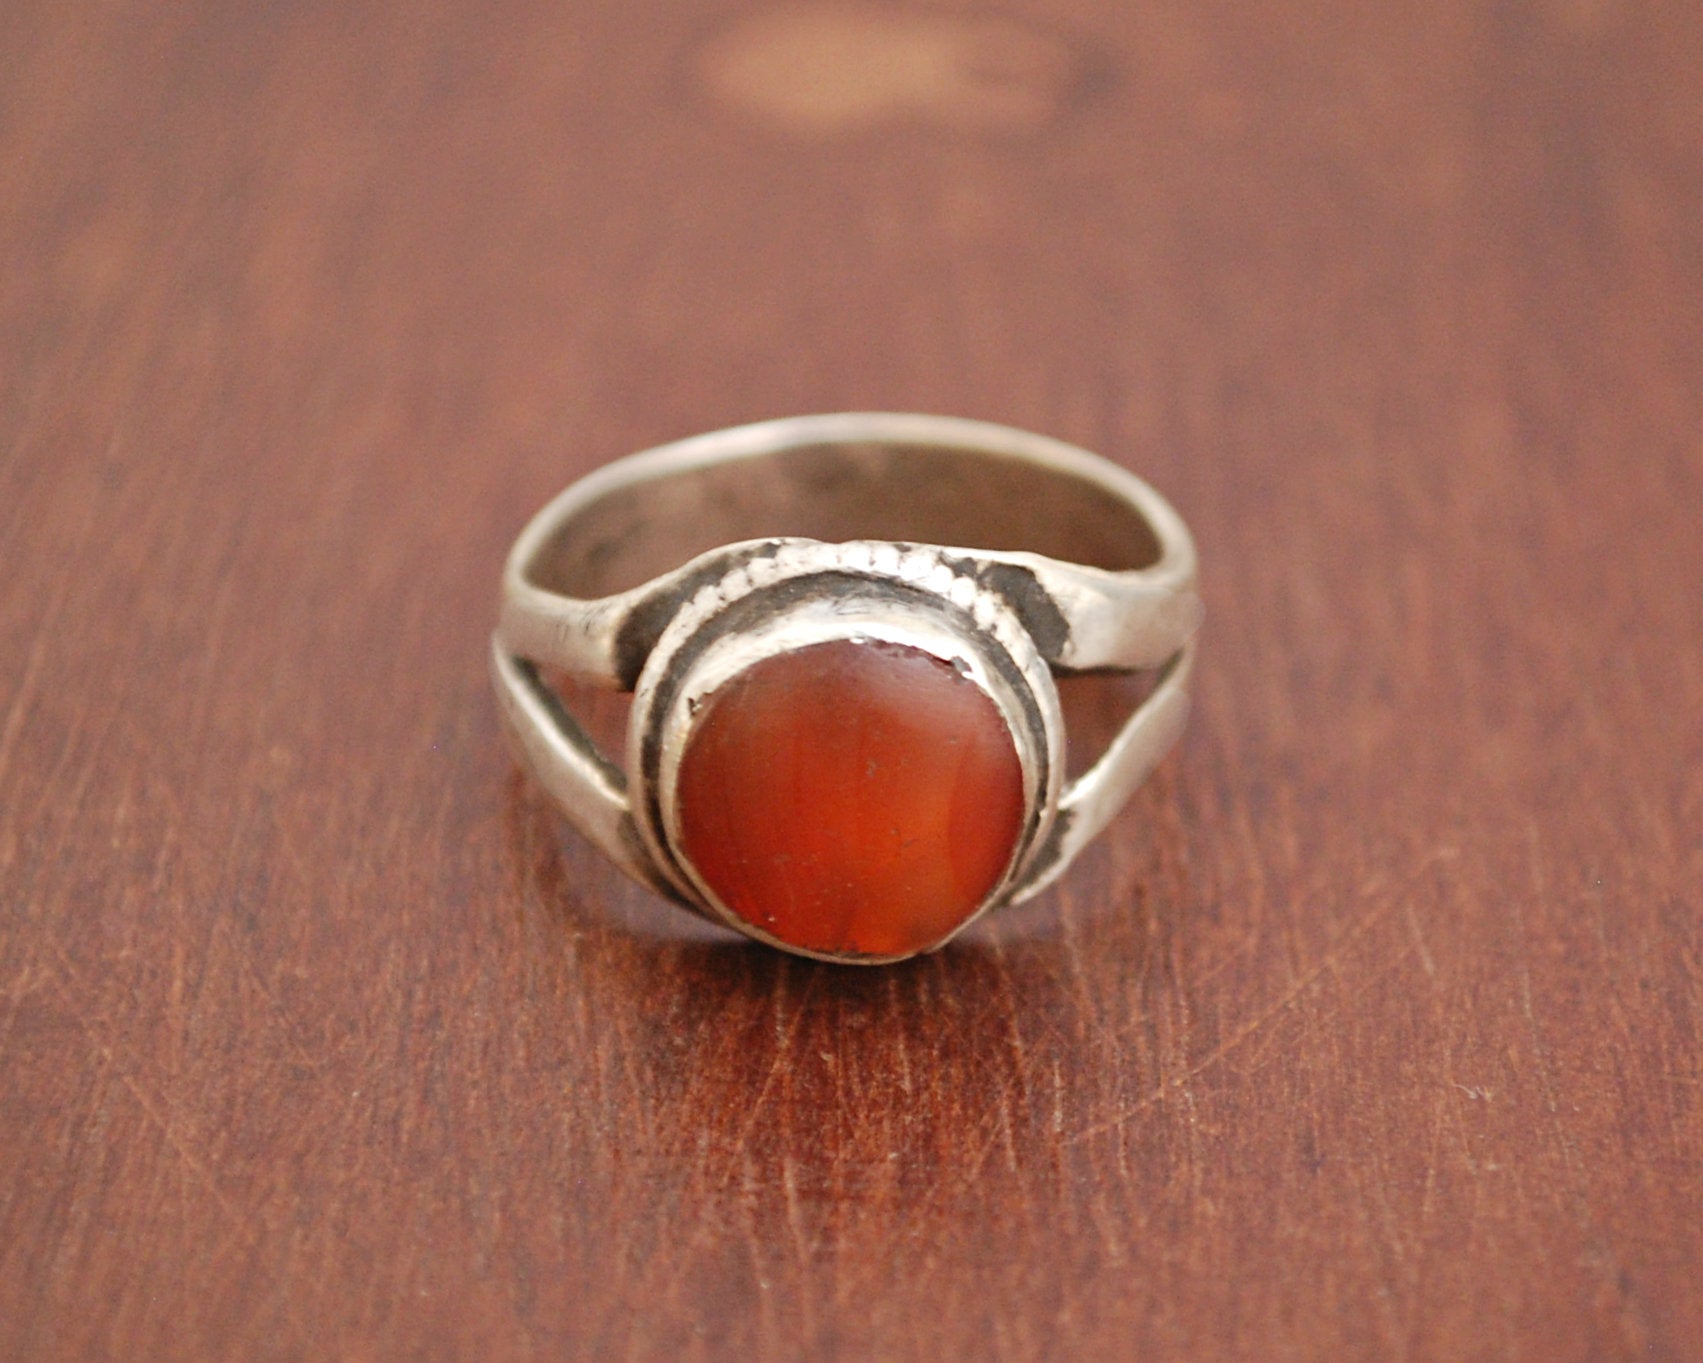 Antique Afghani Carnelian Ring - Size 7.5